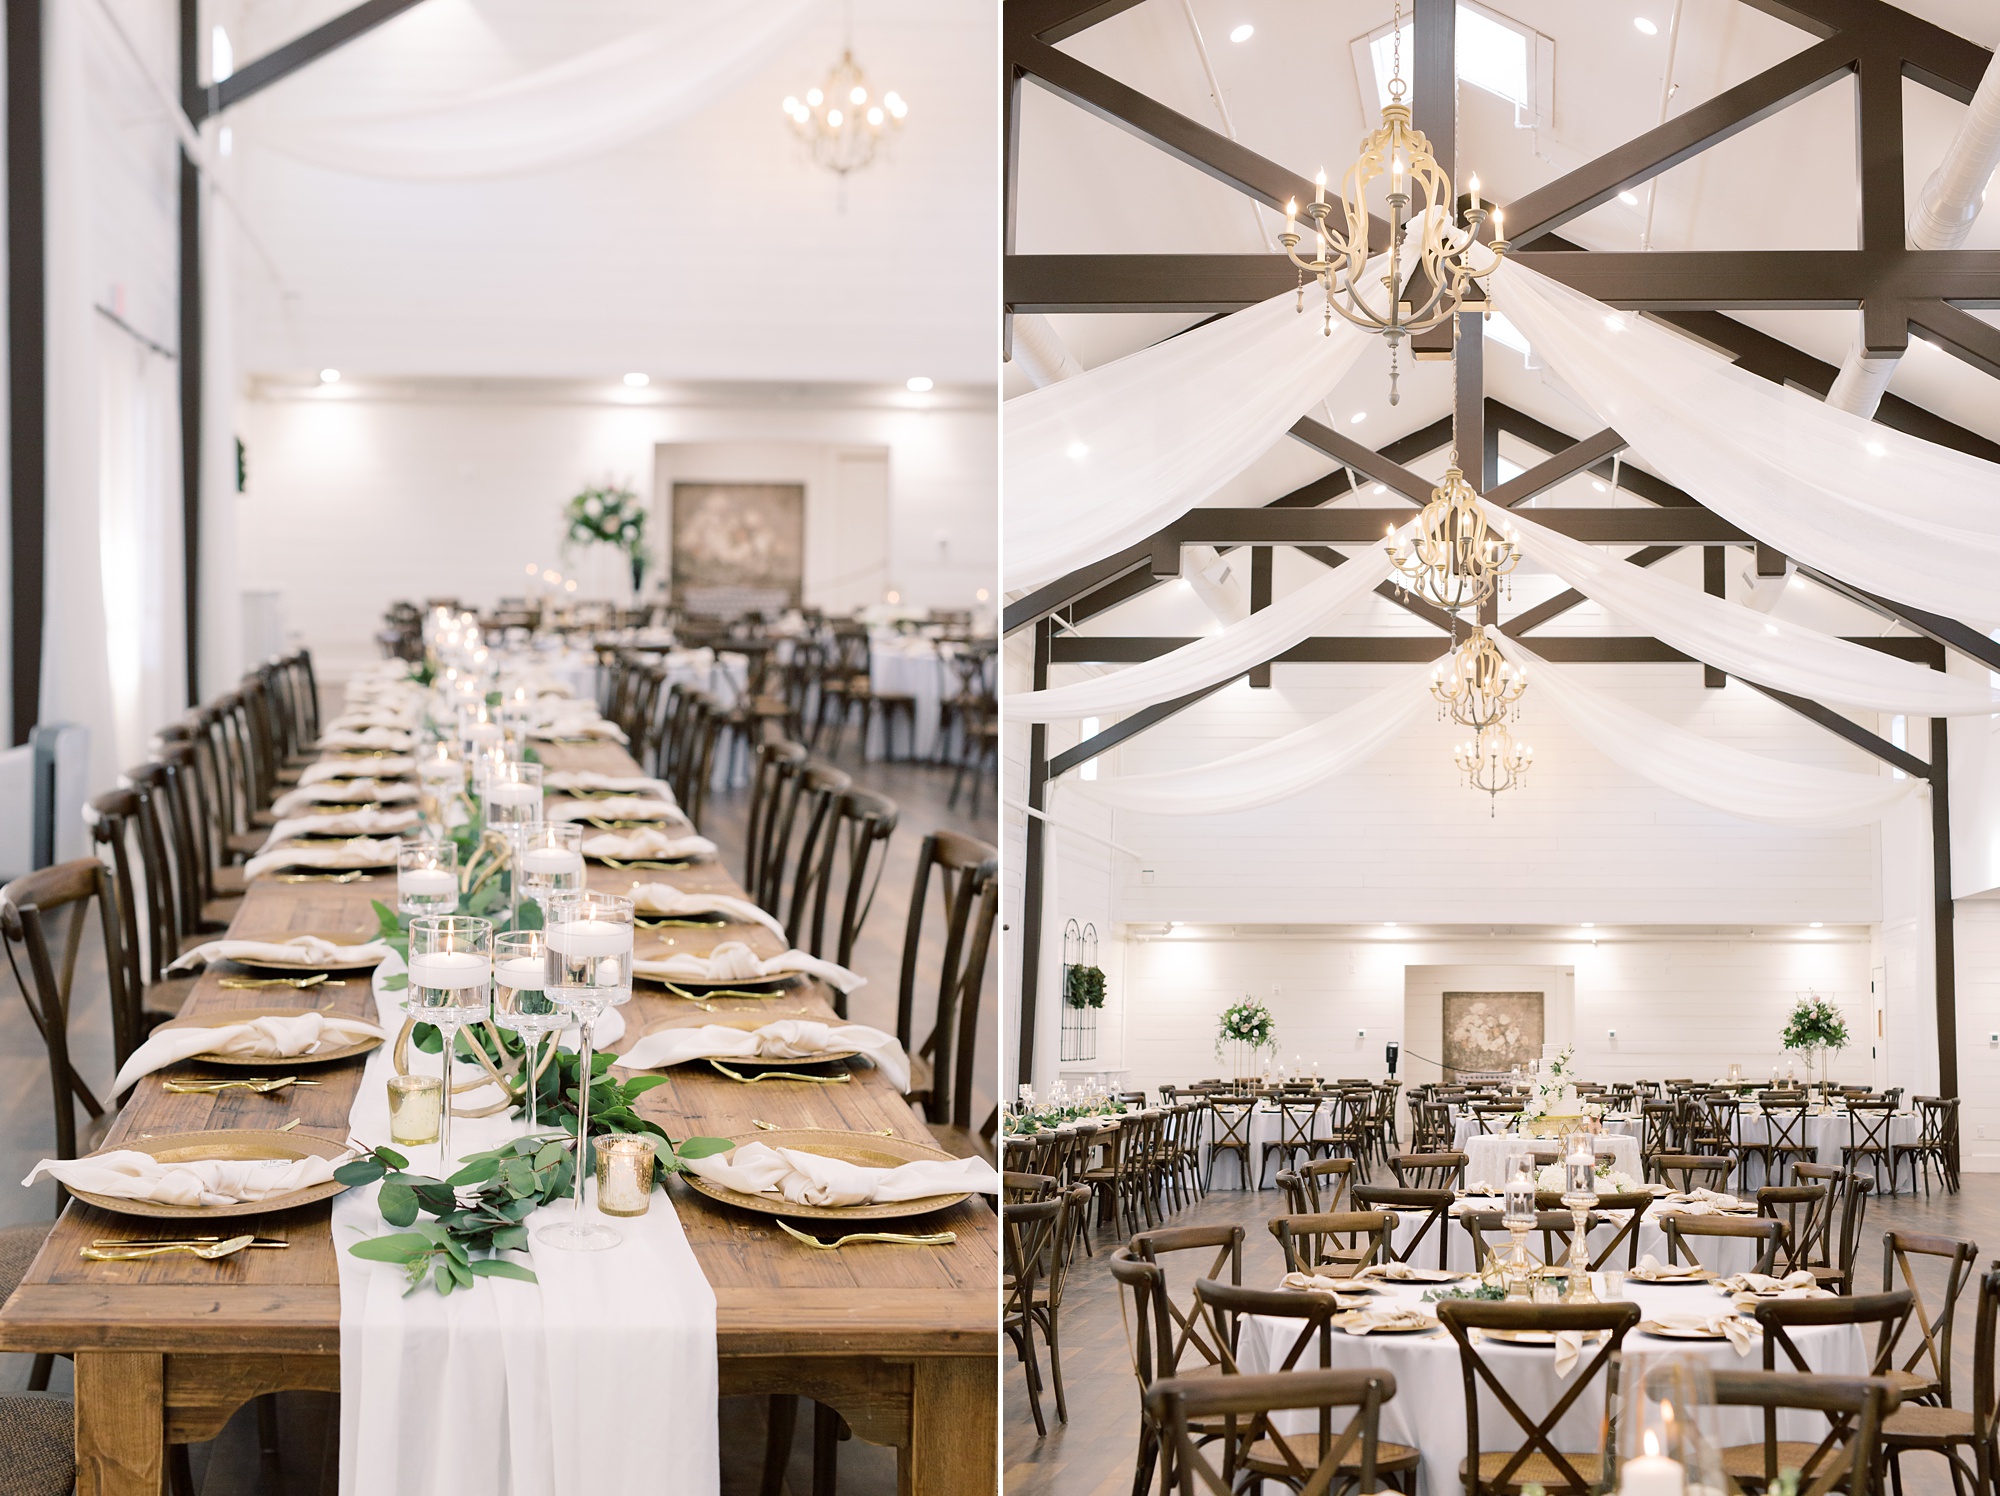 HighPointe Estate wedding reception with white and gold details